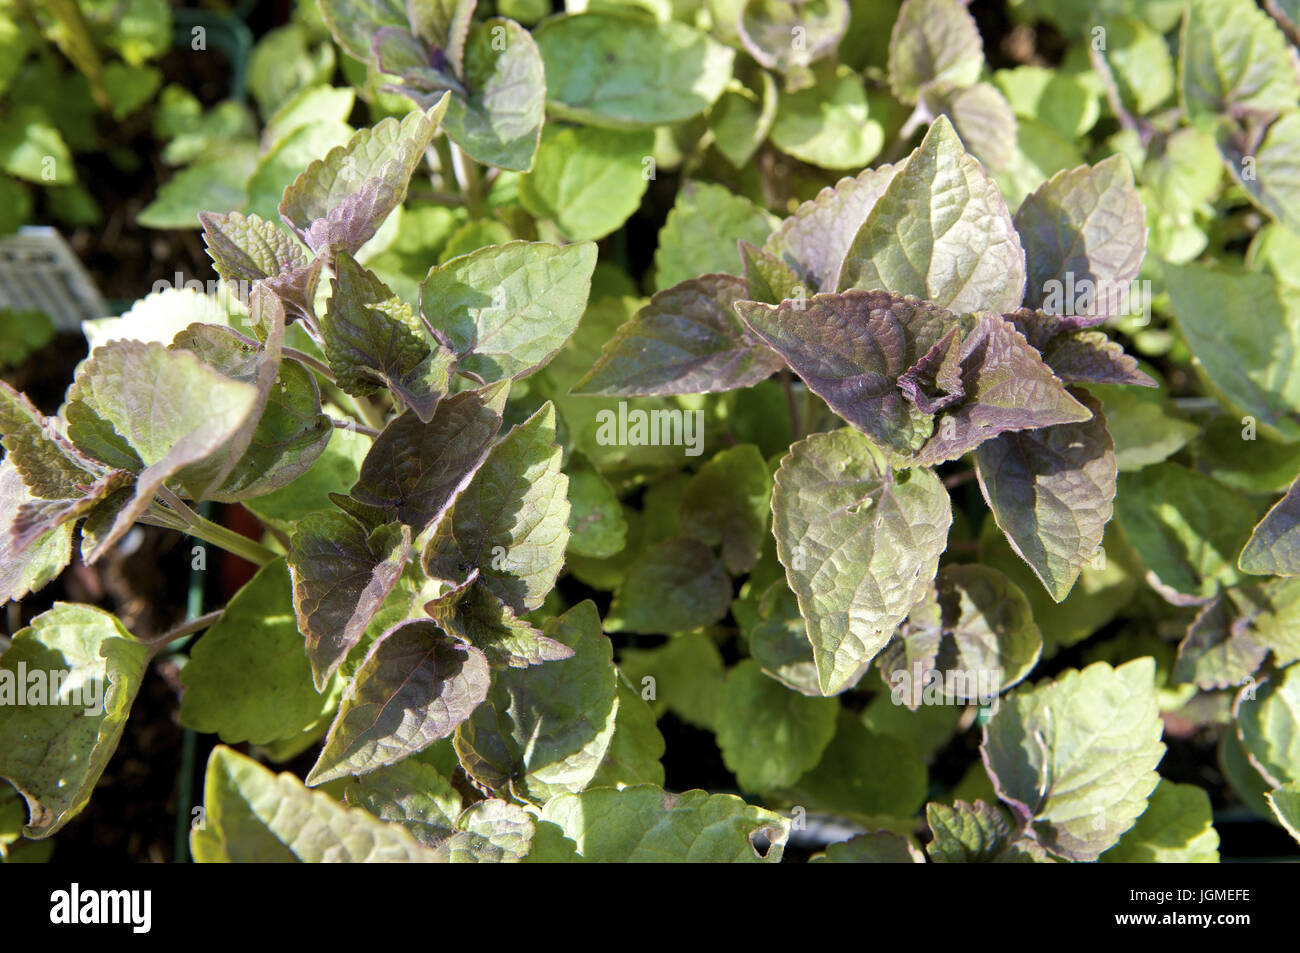 Anis-Ysop (Agastache f?niculum) - to aniseed hyssop (Agastache f?niculum), Anis-Ysop (Agastache foeniculum) - Anise hyssop (Agastache foeniculum) Stock Photo